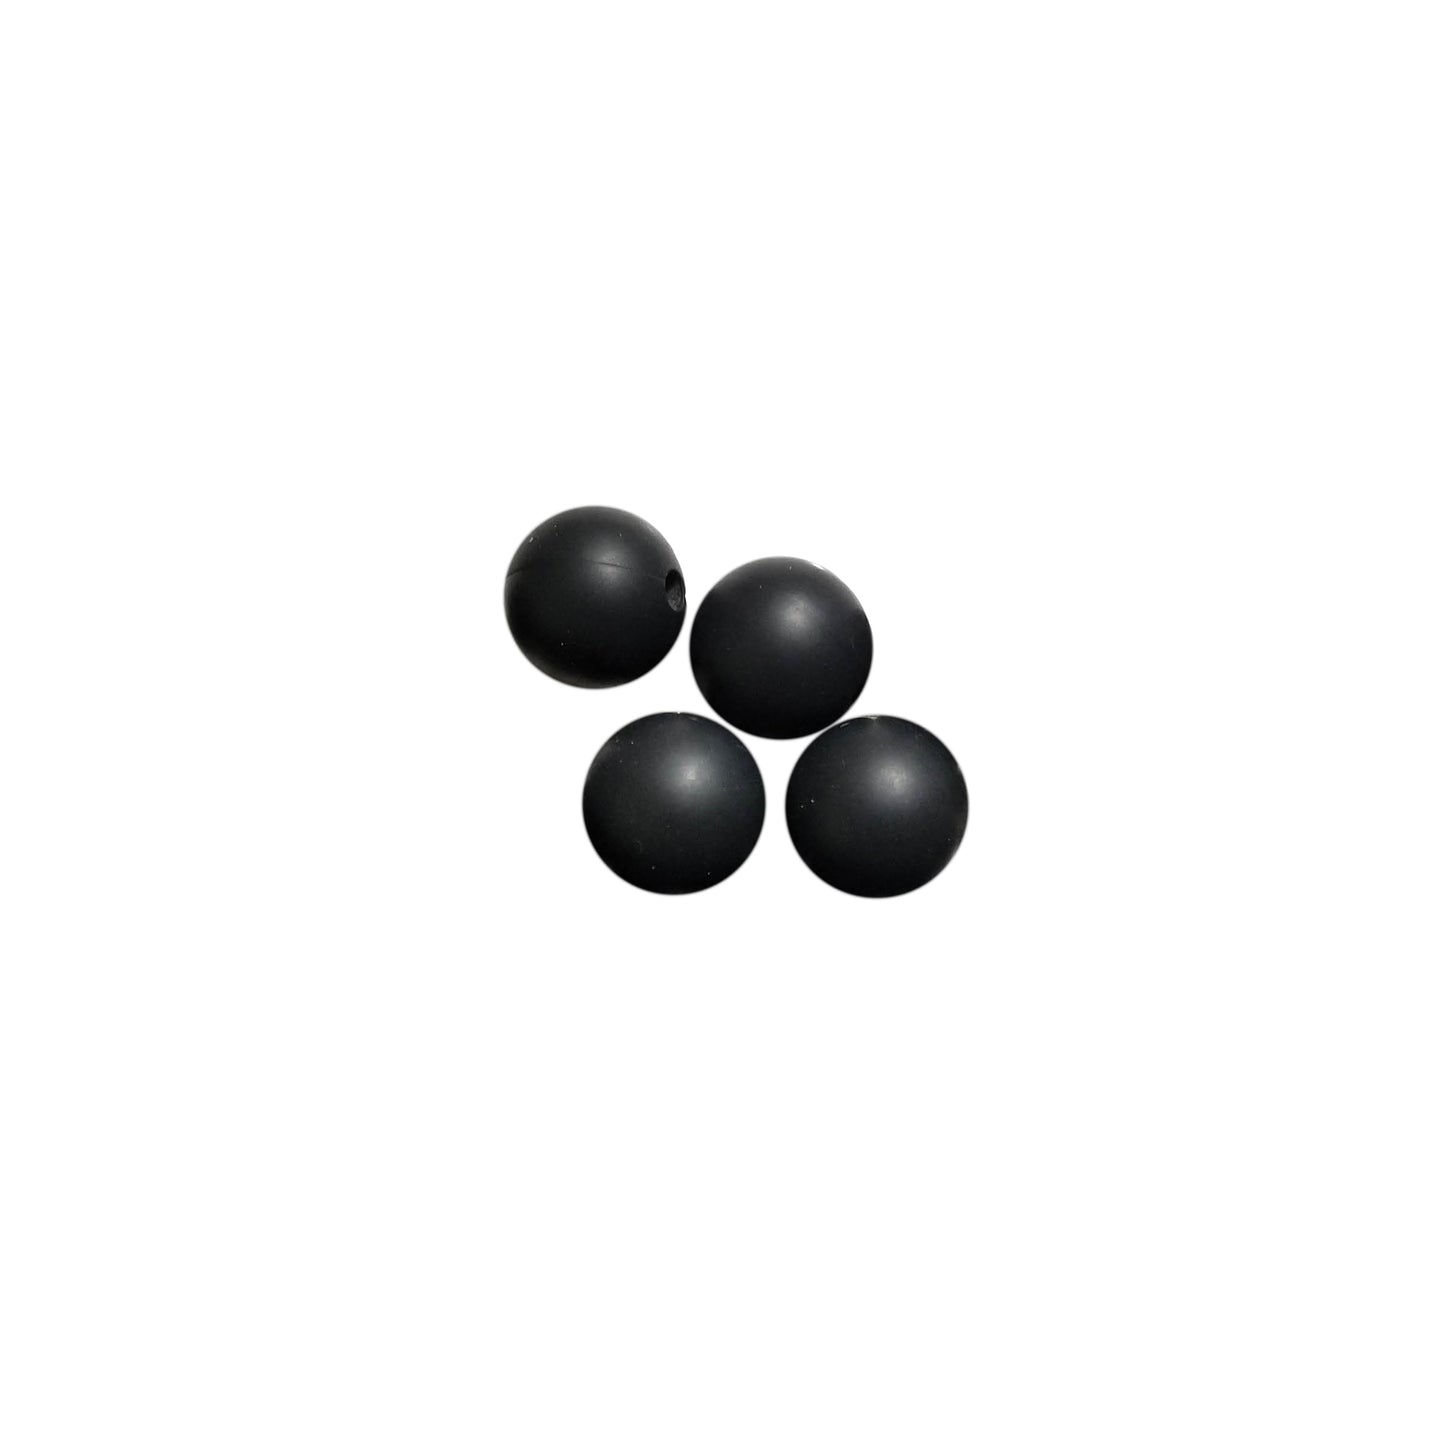 12mm black round silicone beads